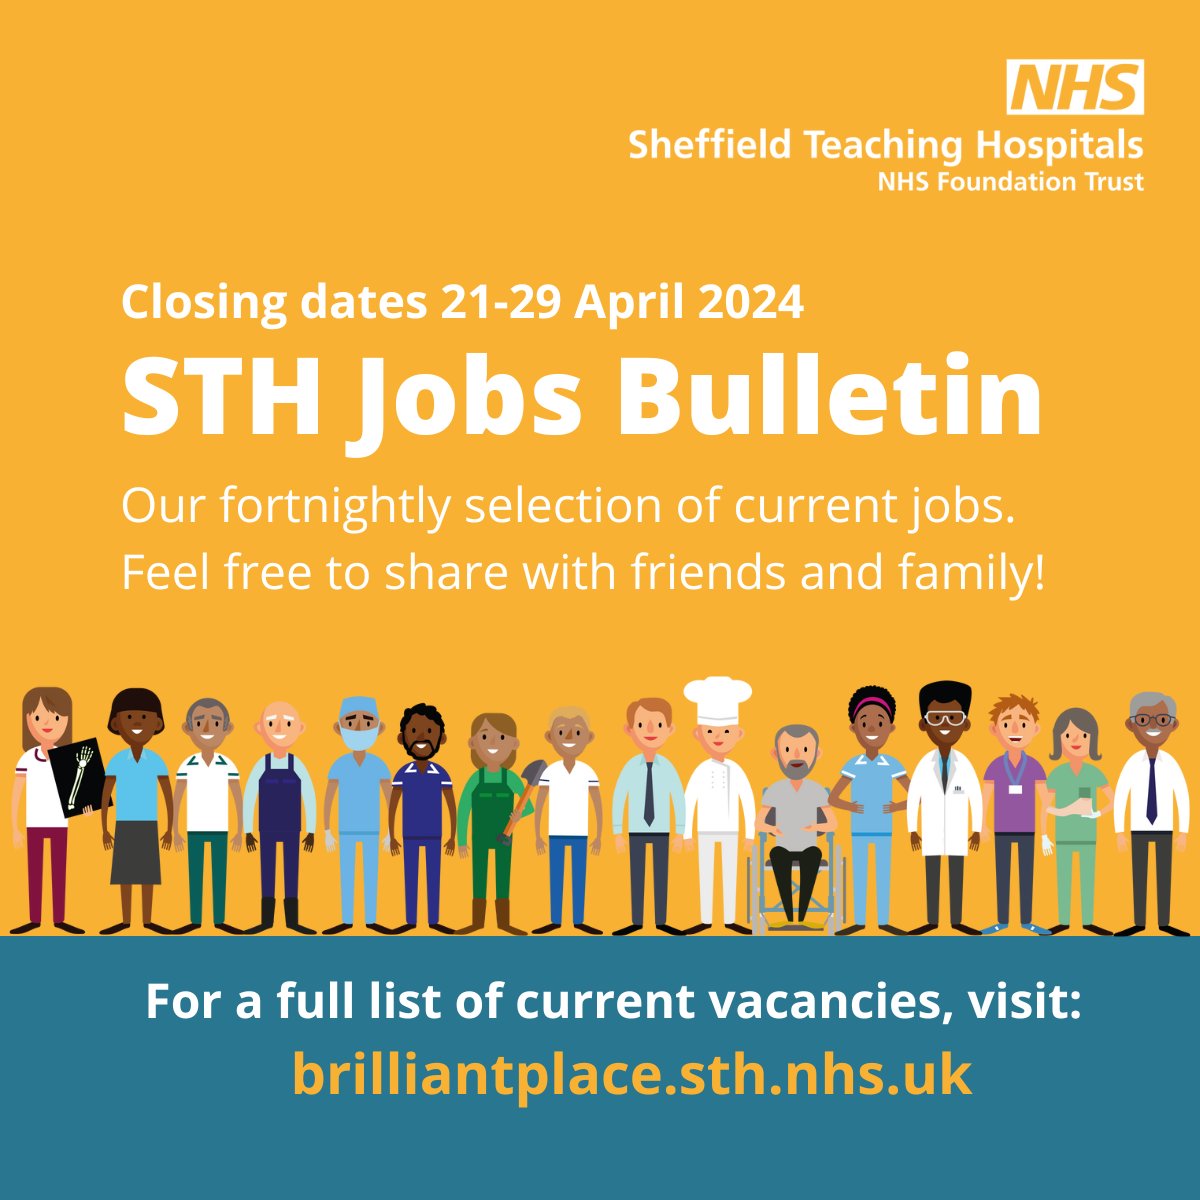 On the job hunt or looking for a new challenge? Check out our latest roles here 👇 brilliantplace.sth.nhs.uk/pdf/STH%20Jobs…